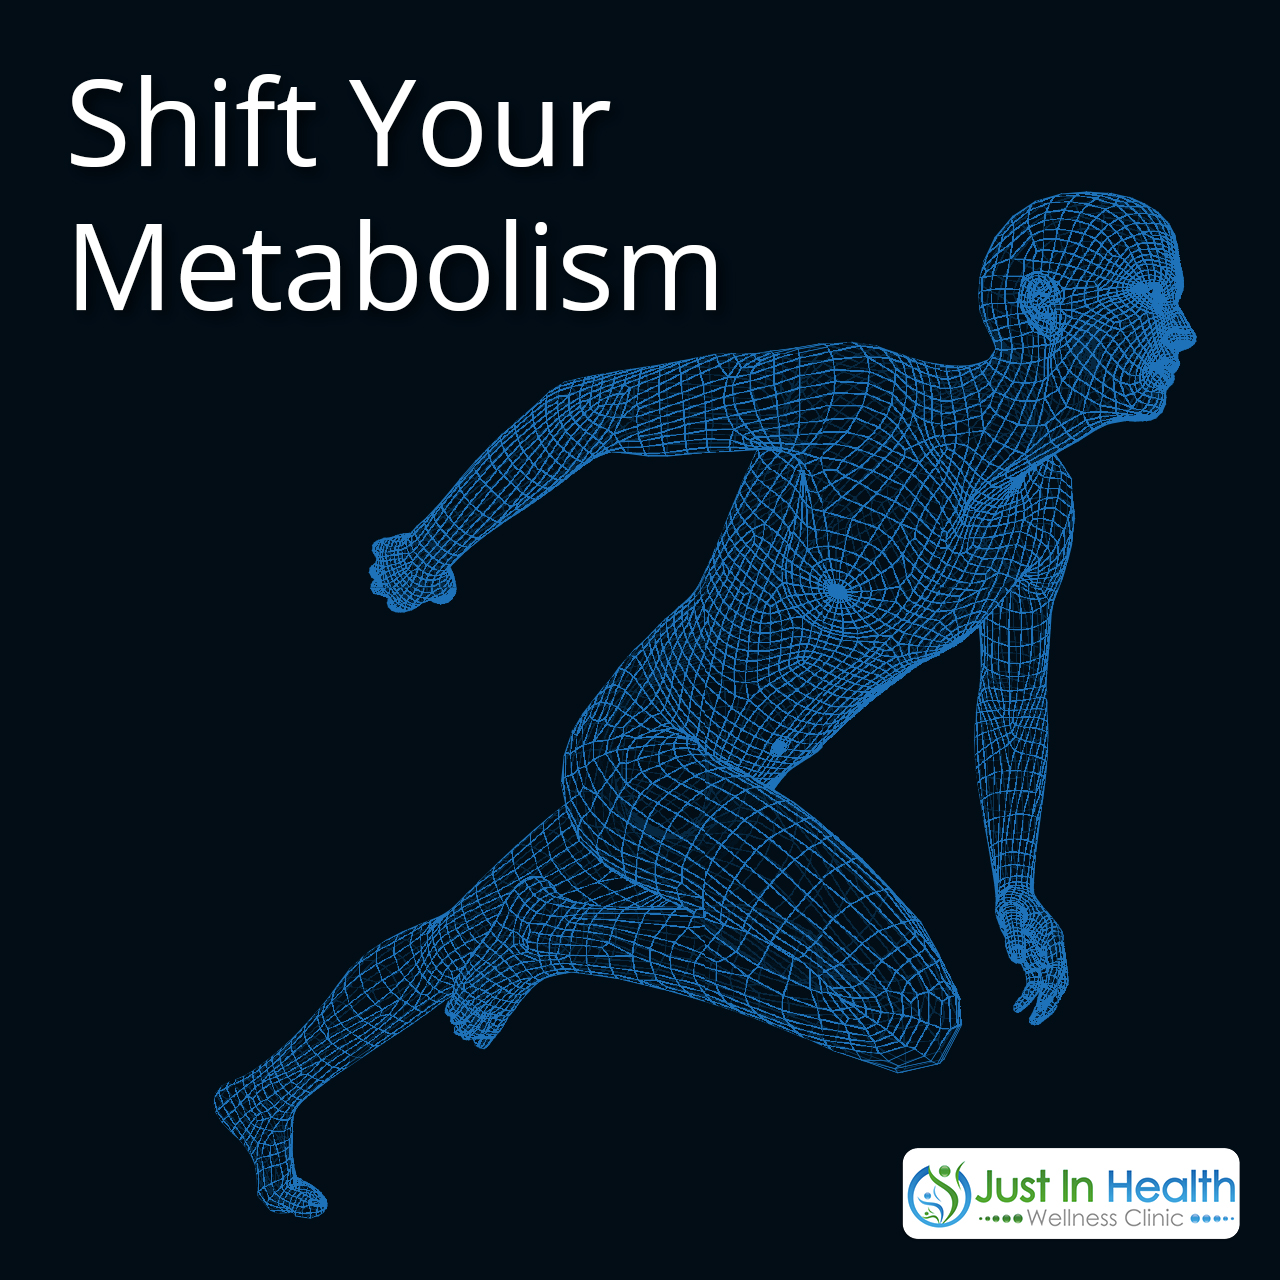 Shift Your Metabolism